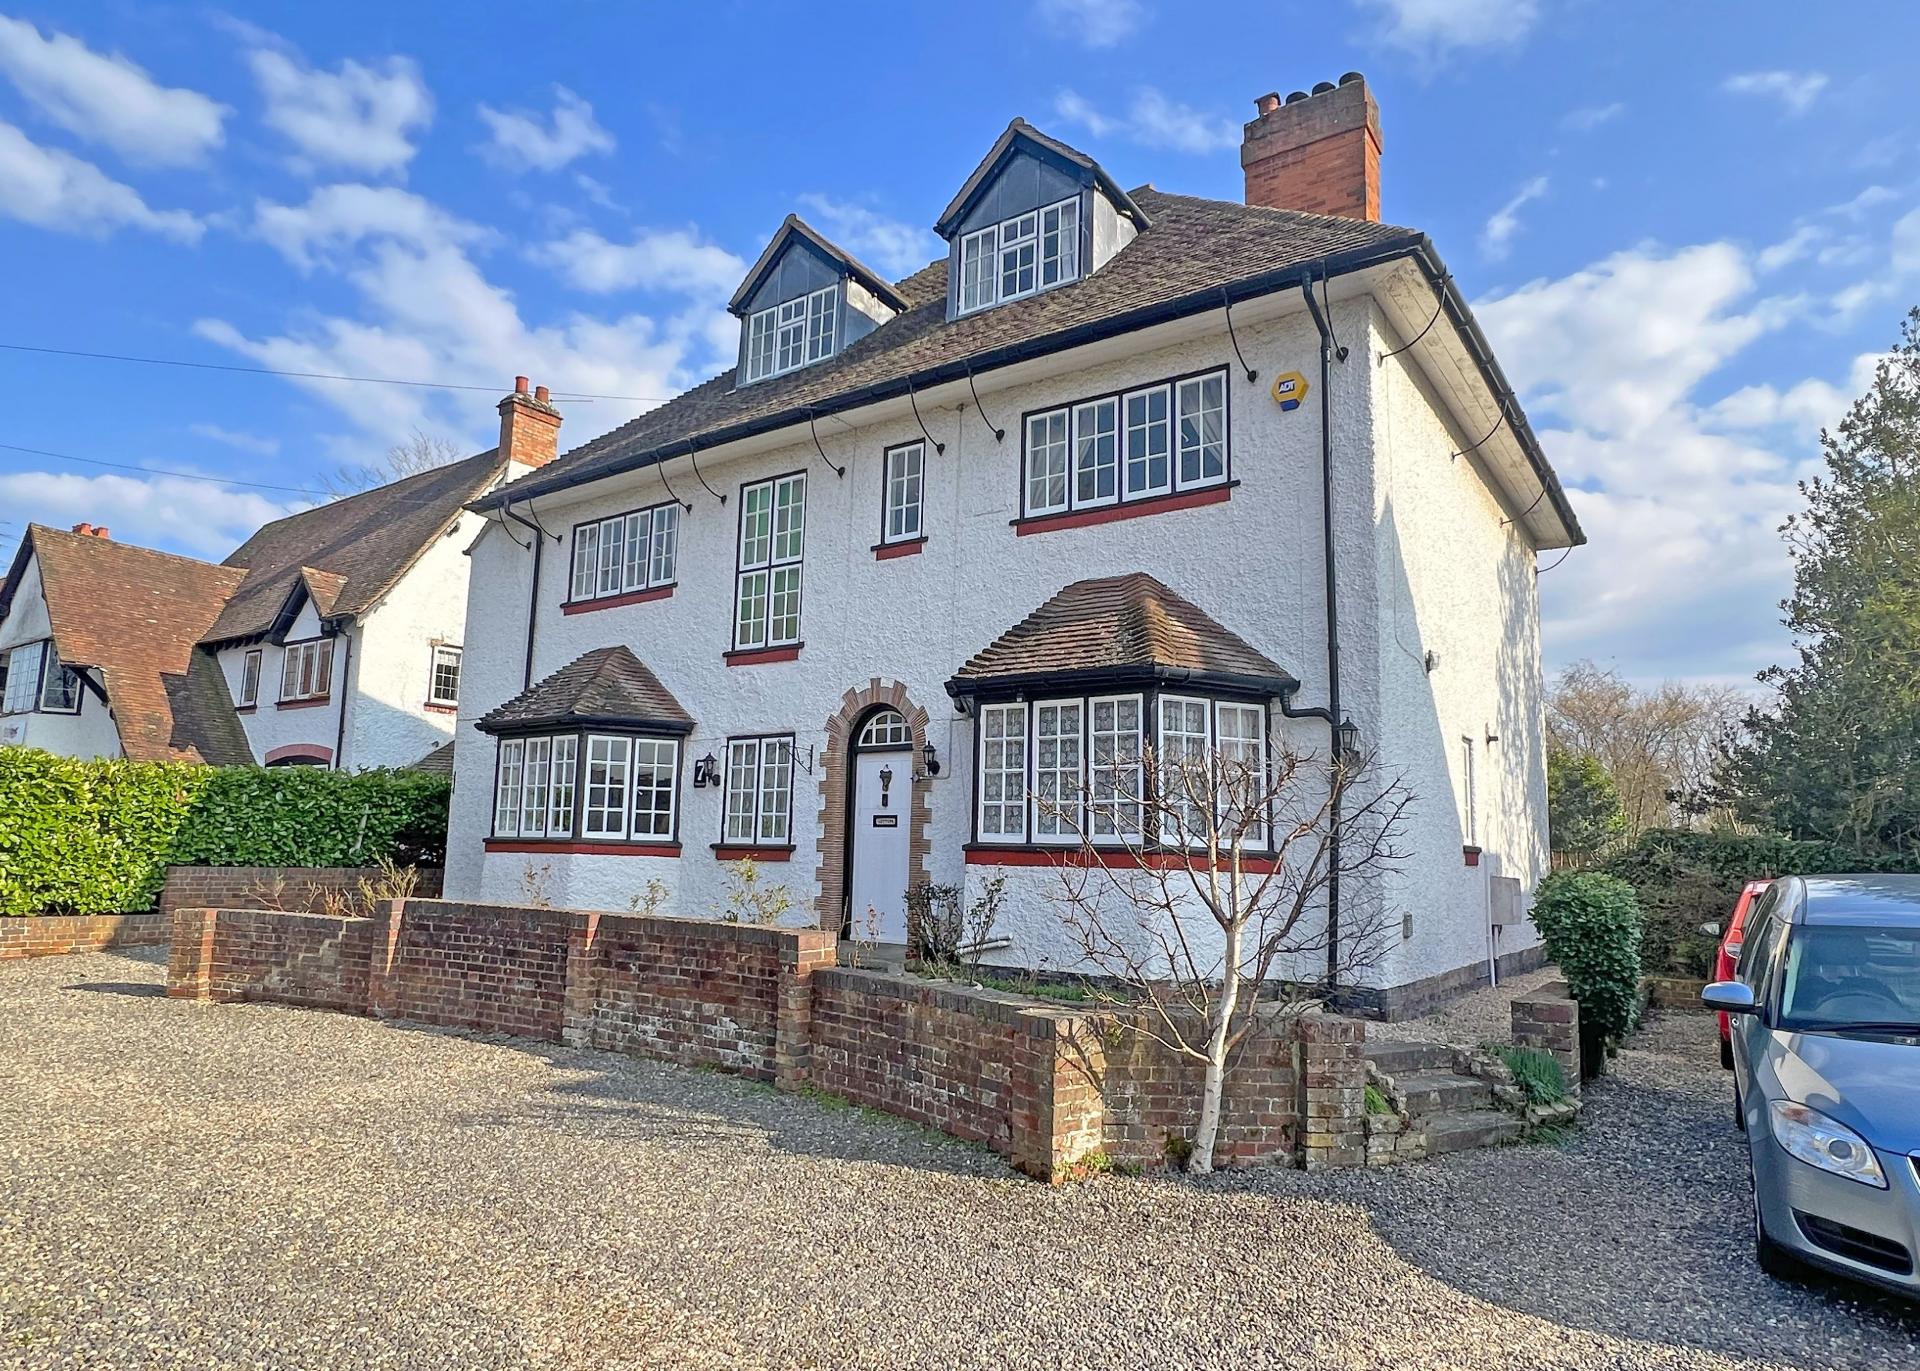 5 Bedroom House for sale in Stratford-Upon-Avon